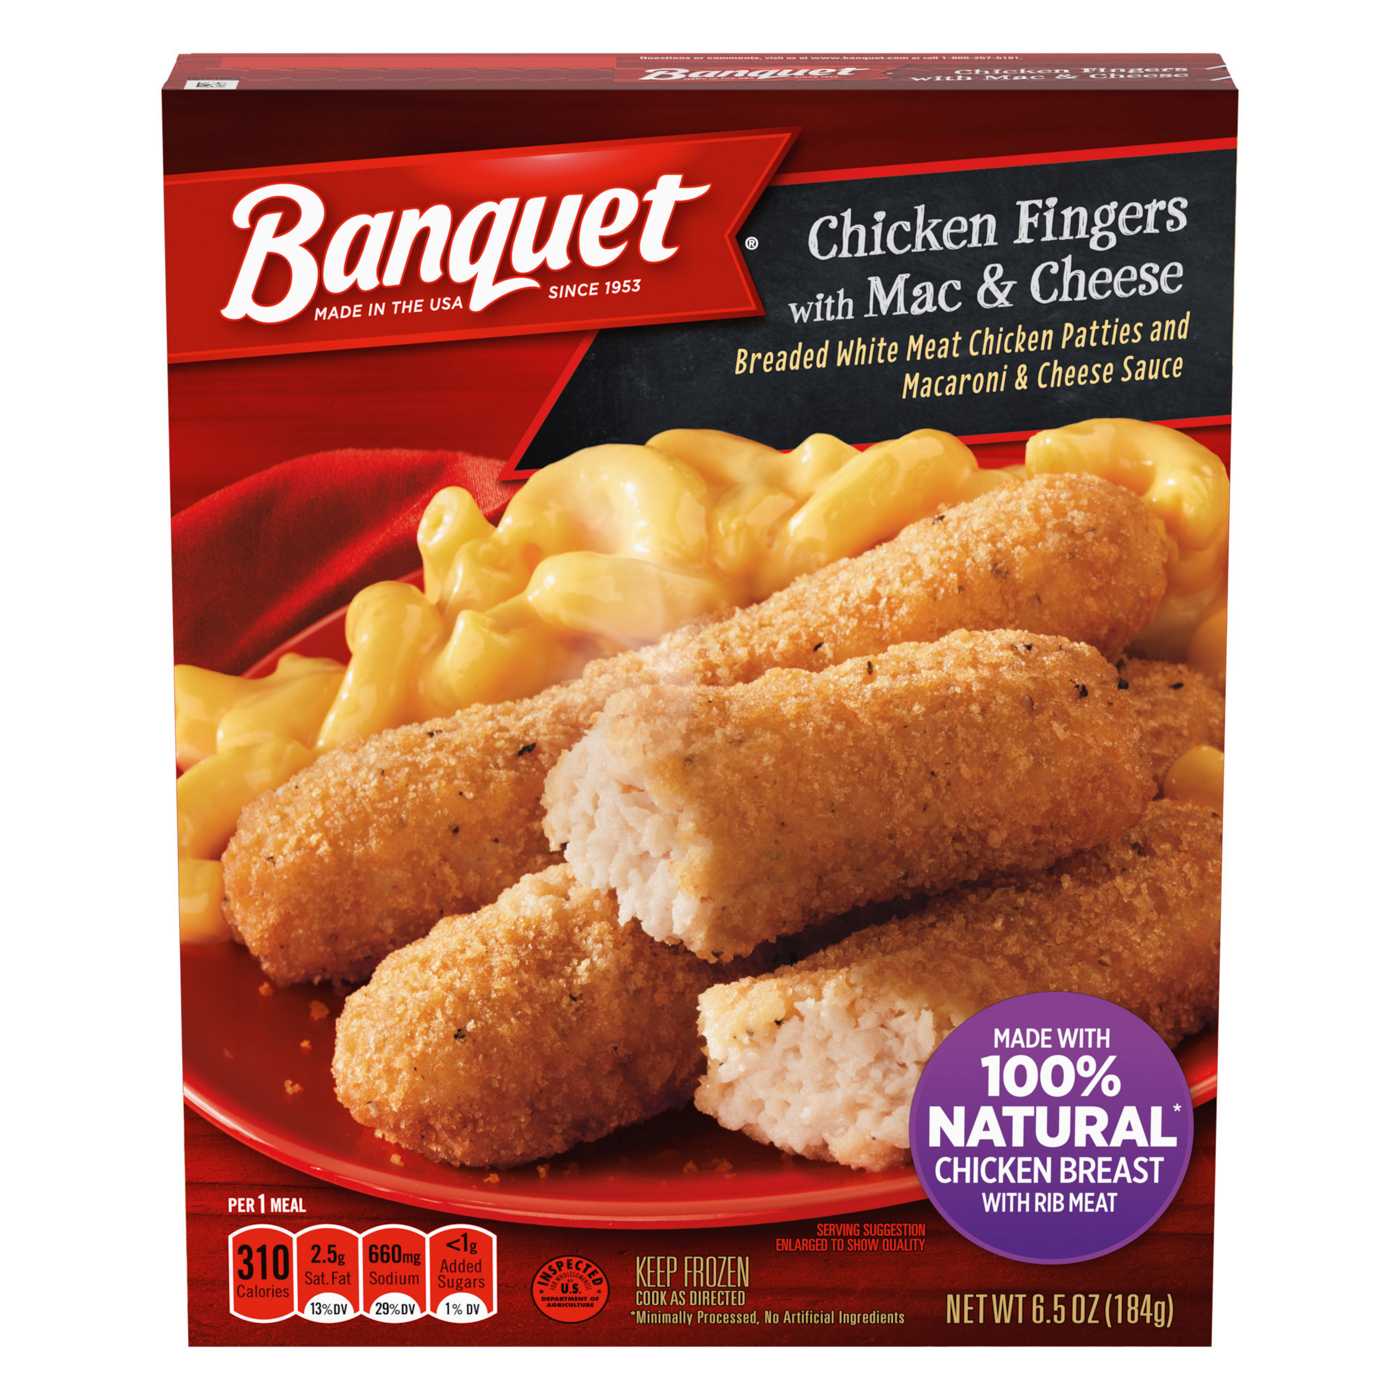 Banquet Chicken Fingers Frozen Meal; image 1 of 5